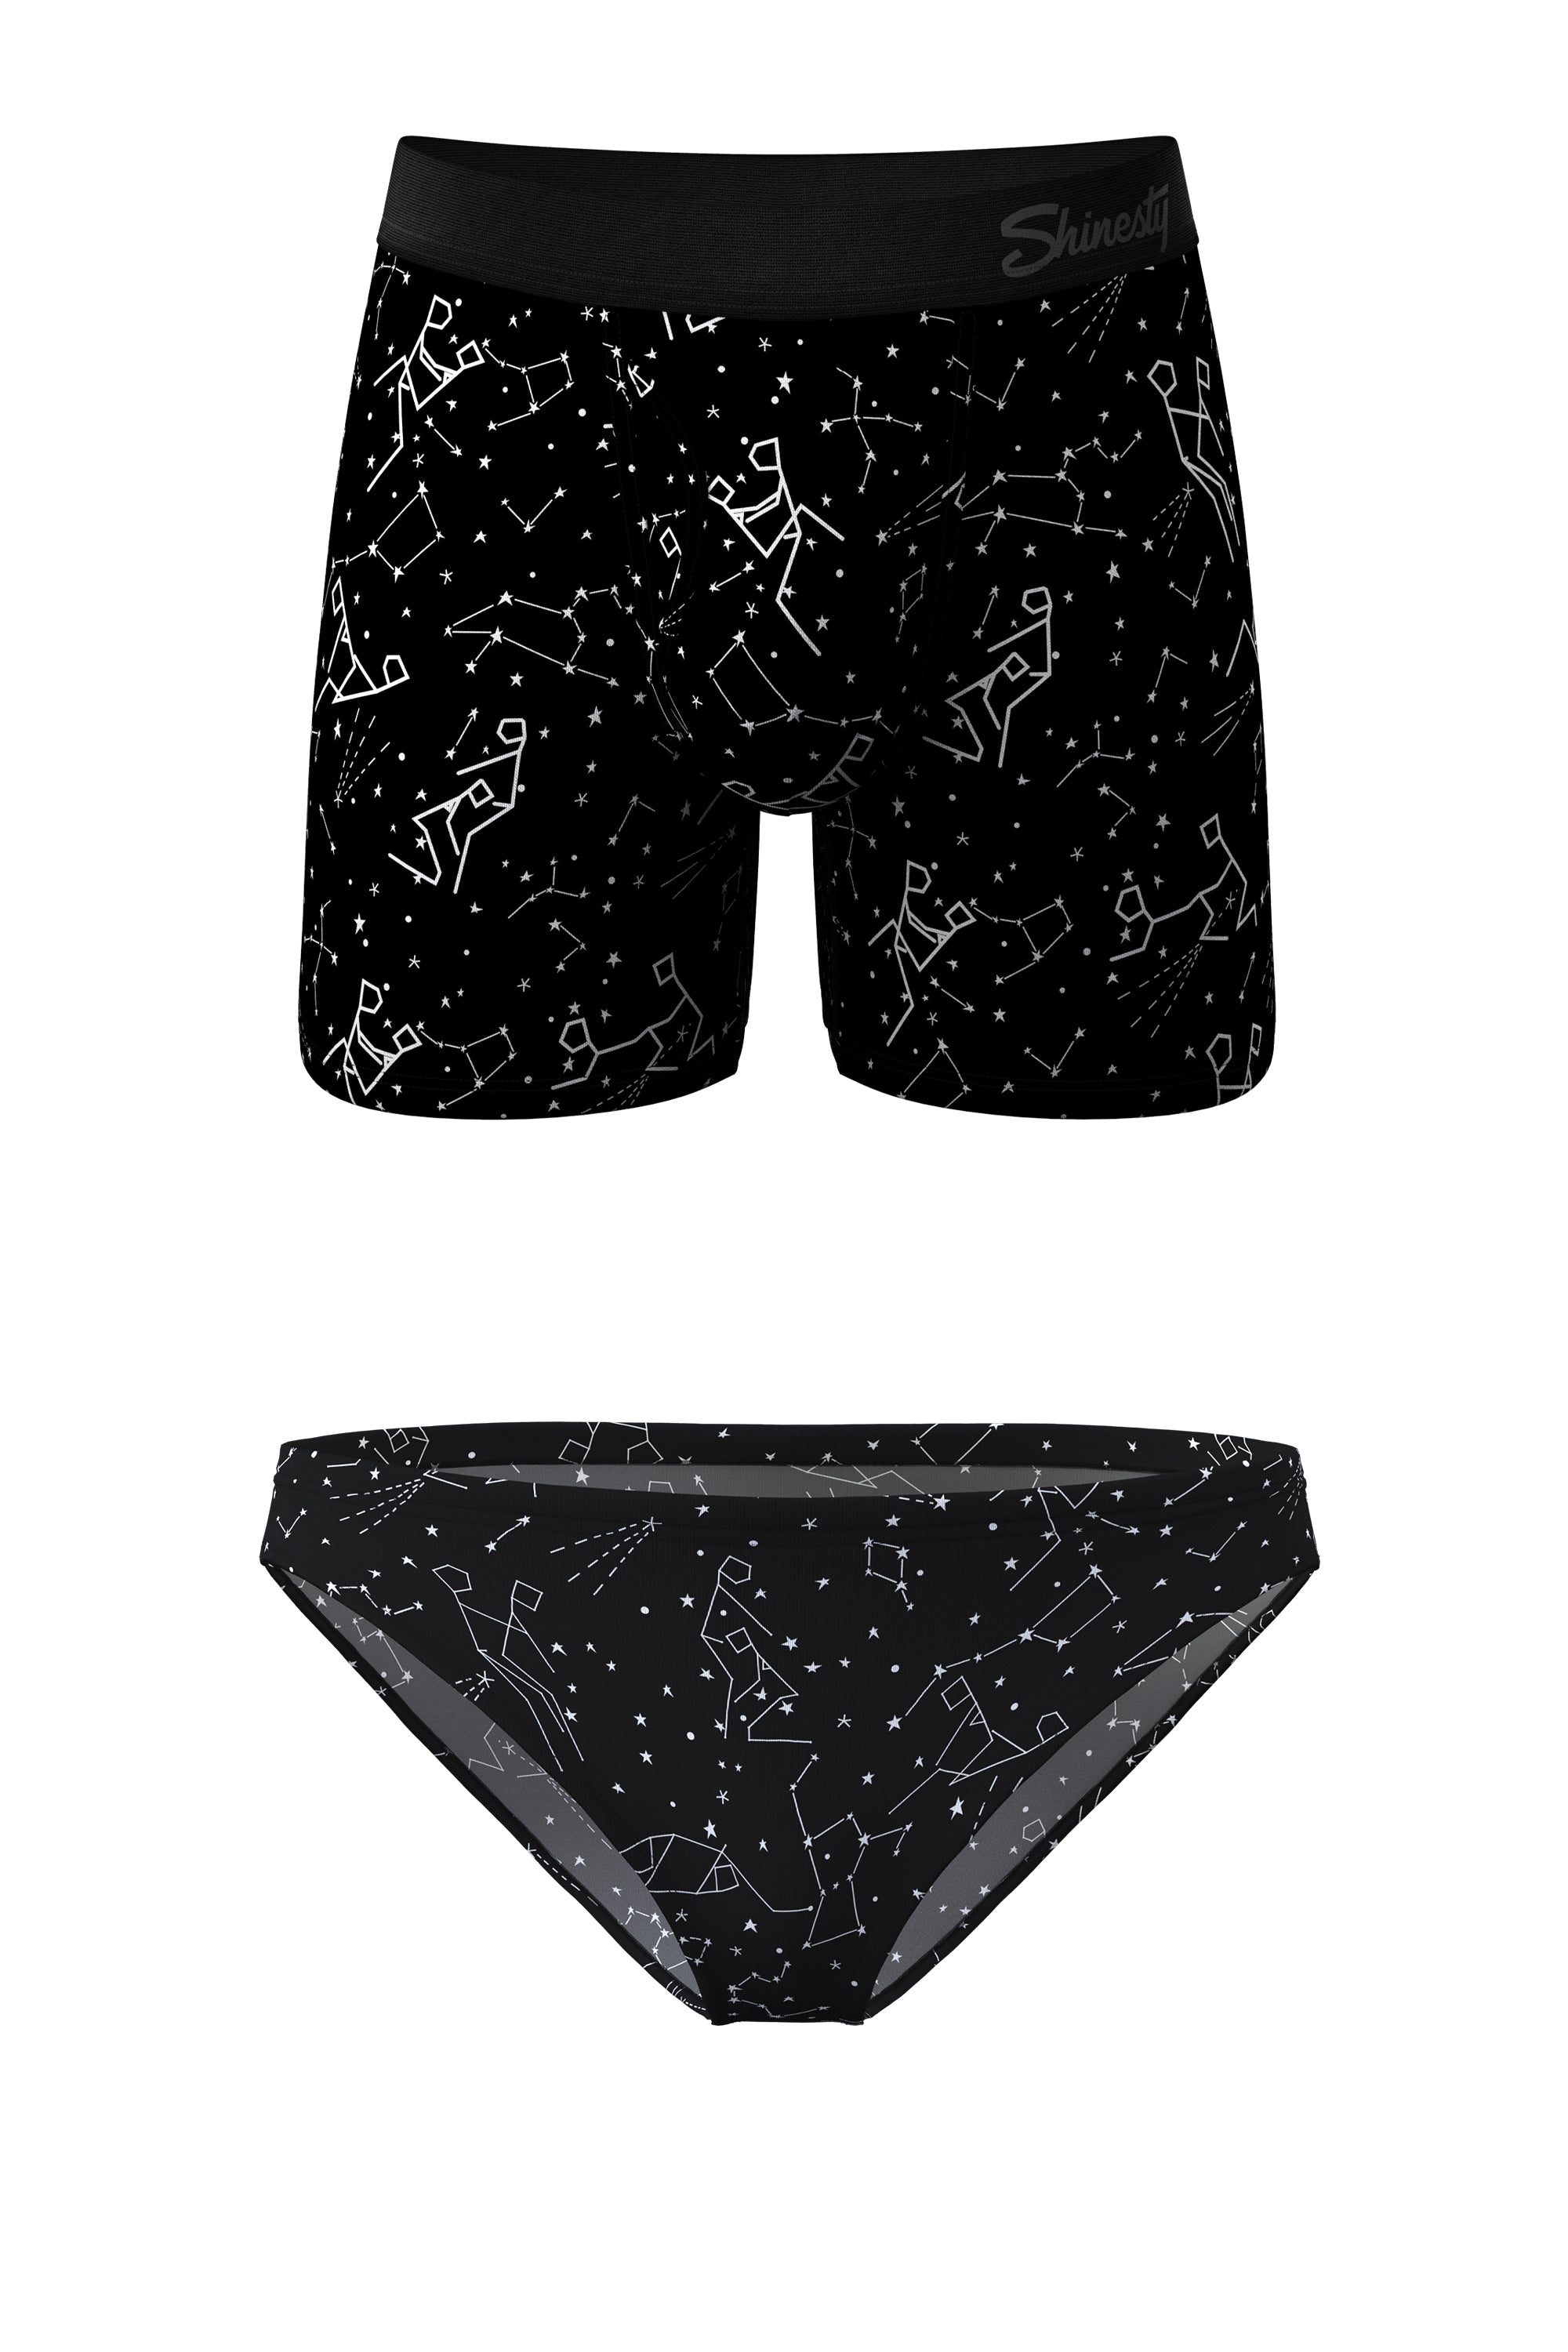 Constellation Ball Hammock® Boxer With Fly and Bikini Matching Couples  Underwear Pack